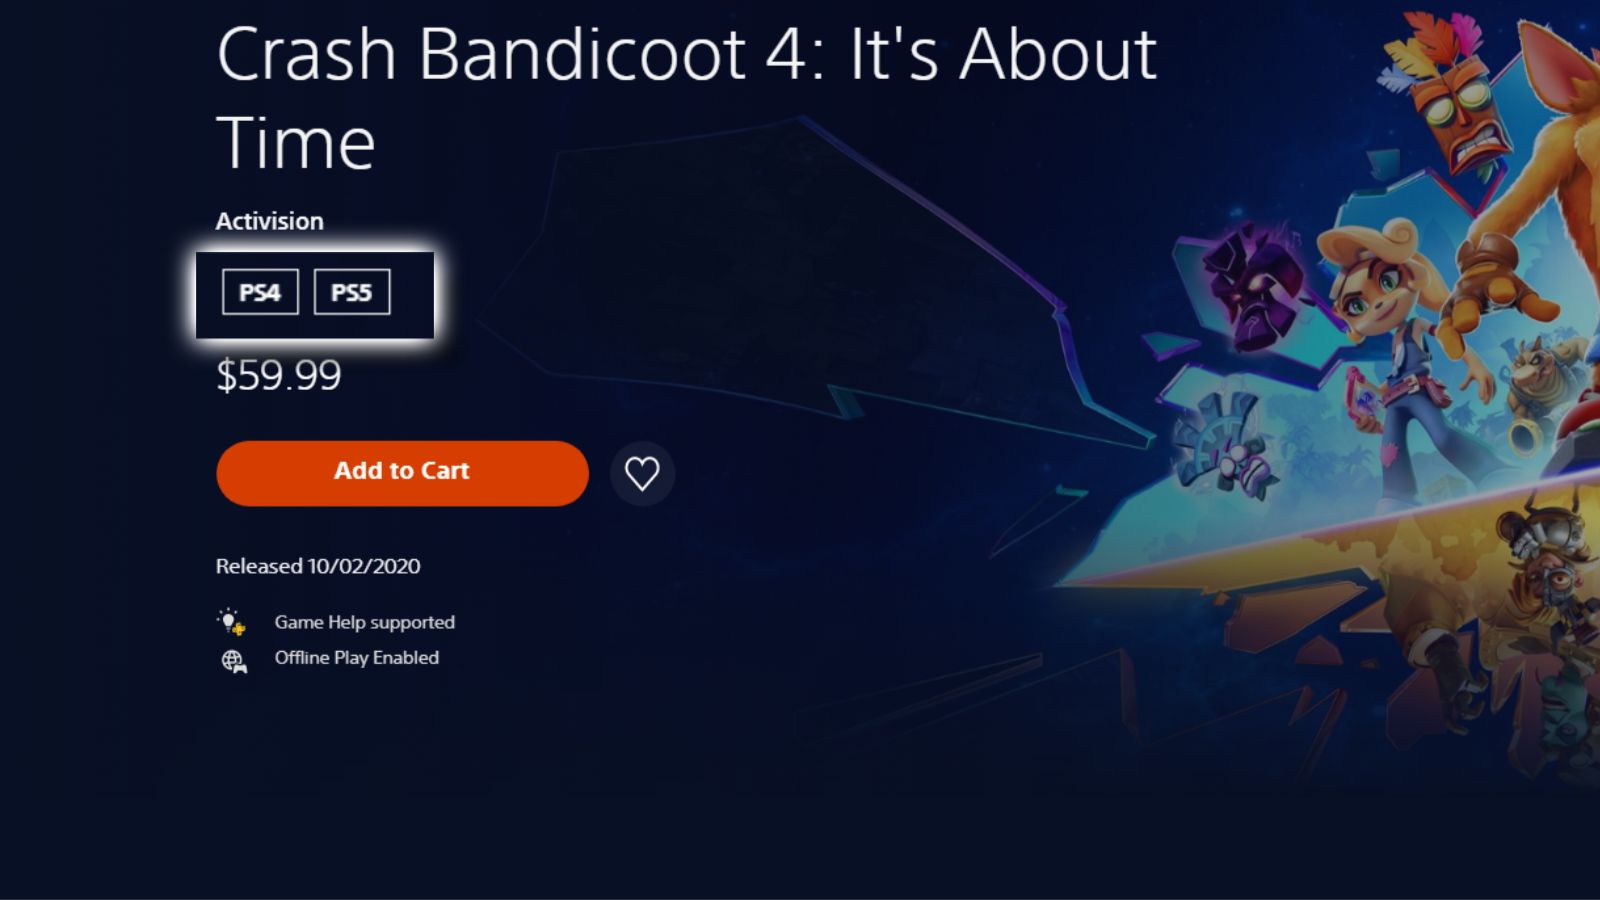 PlayStation 5 'Crash Bandicoot 4: It's About Time' store page with the platforms section highlighted